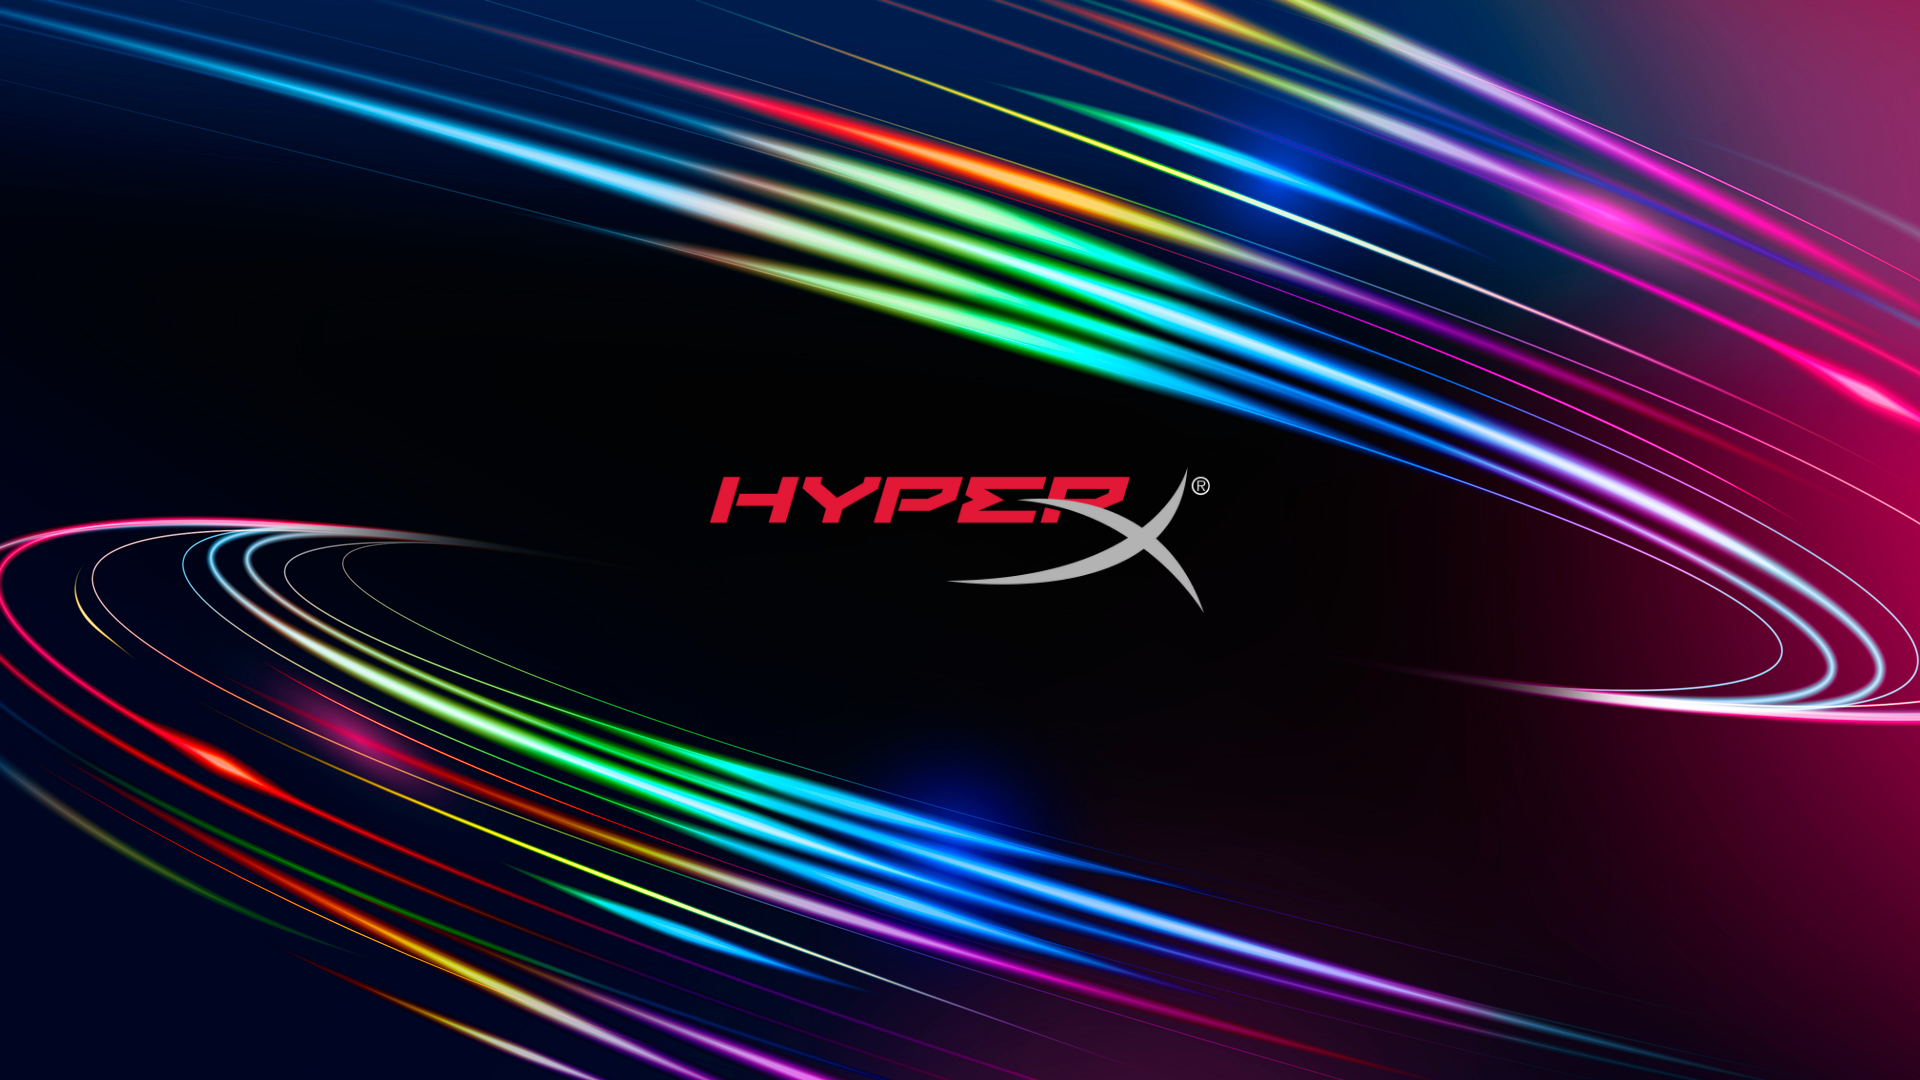 PC Gaming HyperX Colorful 1920x1080